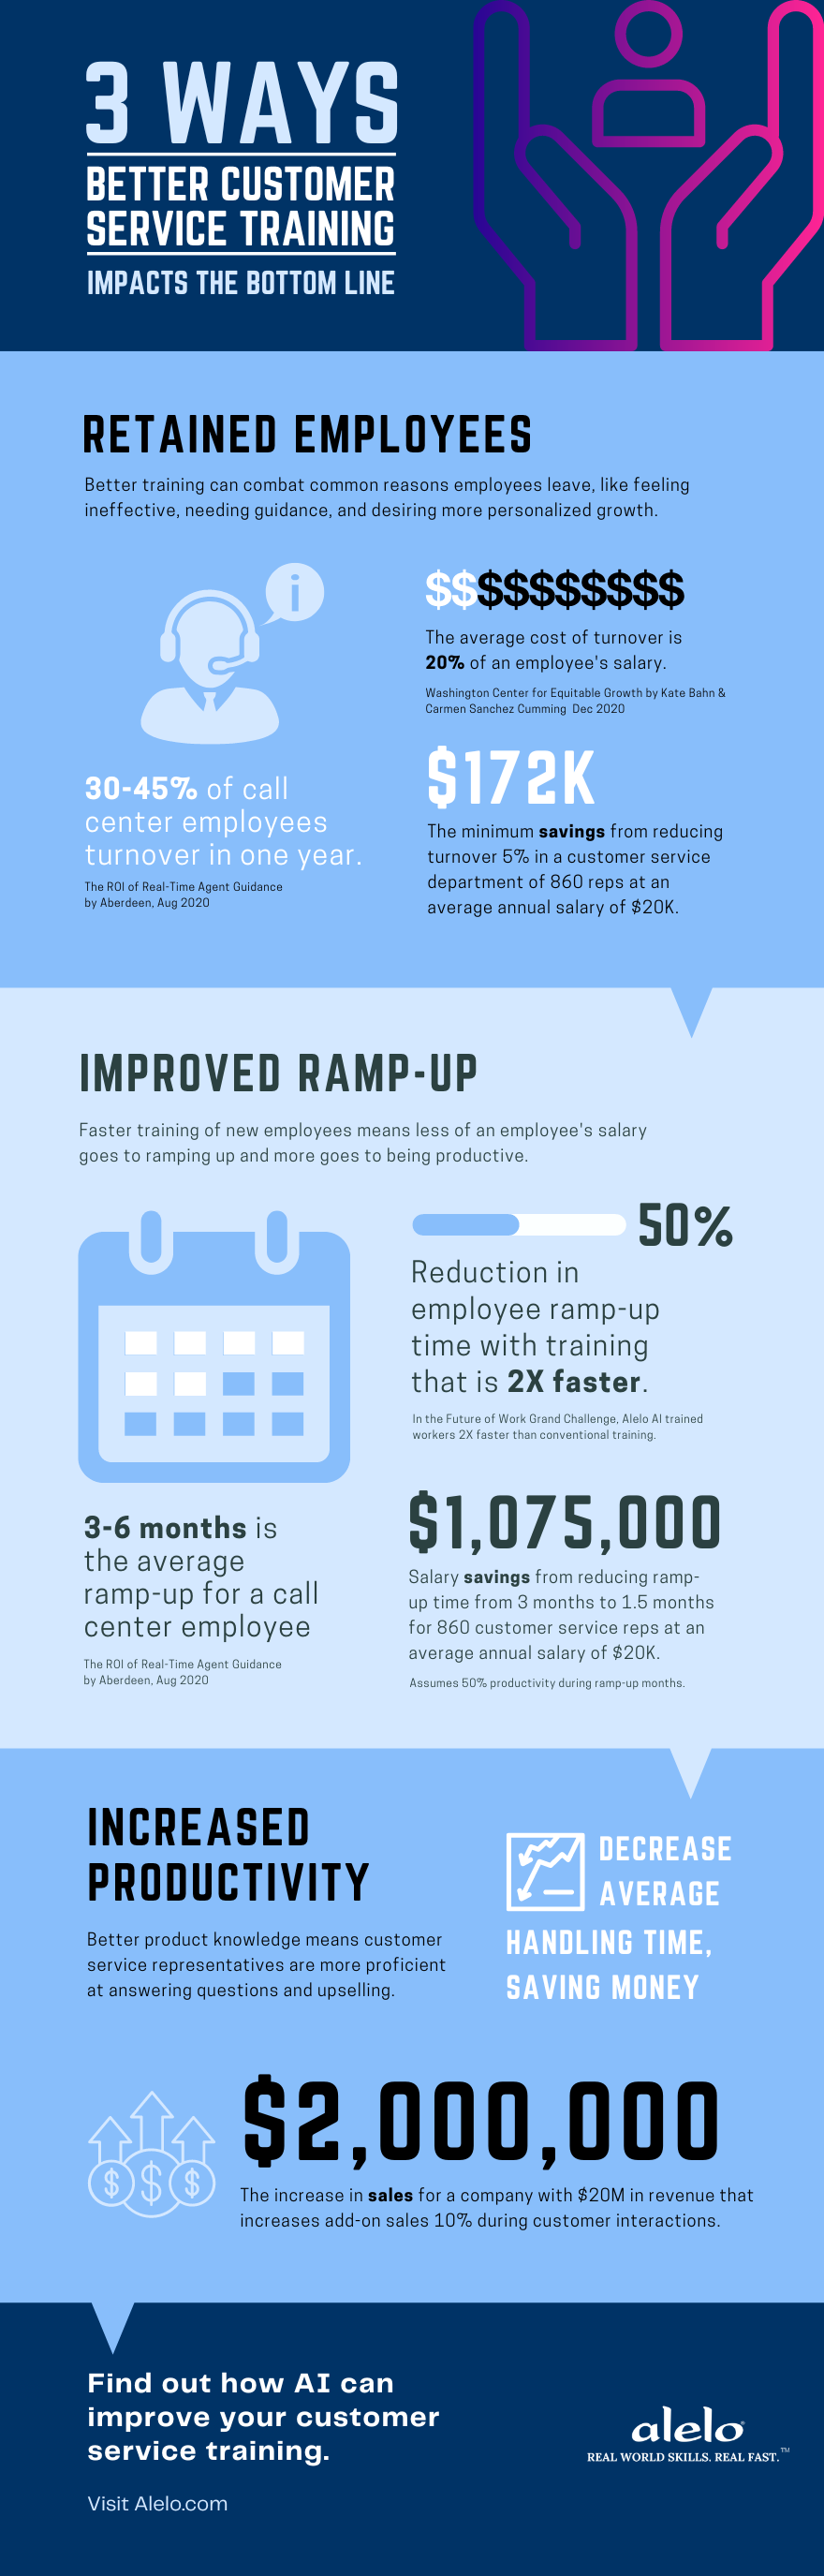 Infographic: 3 Ways Better Customer Service Training Led By AI Impacts the Bottom Line